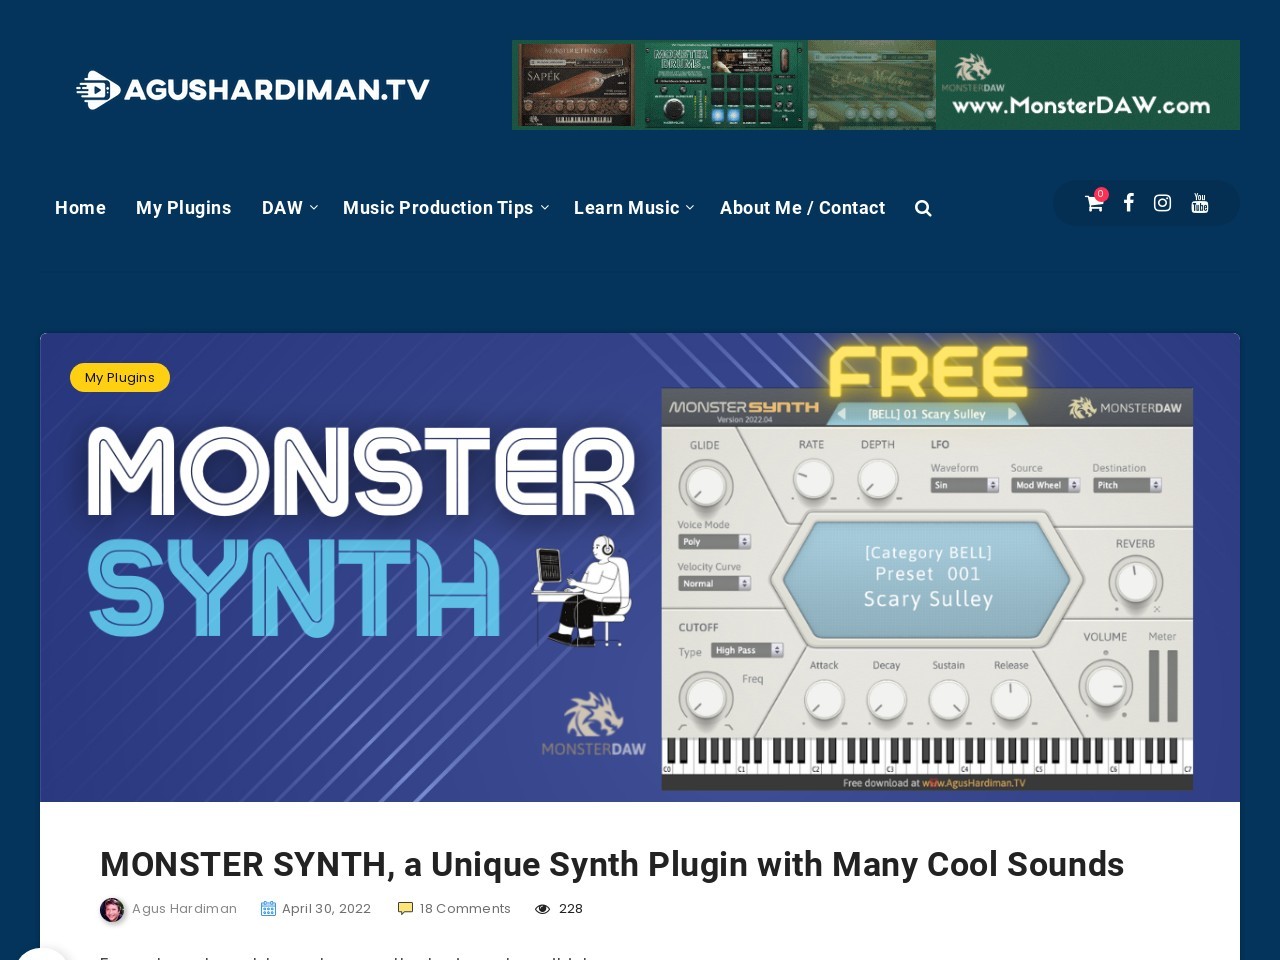 MONSTER SYNTH, a Unique Synth Plugin with Many Cool Sounds - AgusHardiman.TV